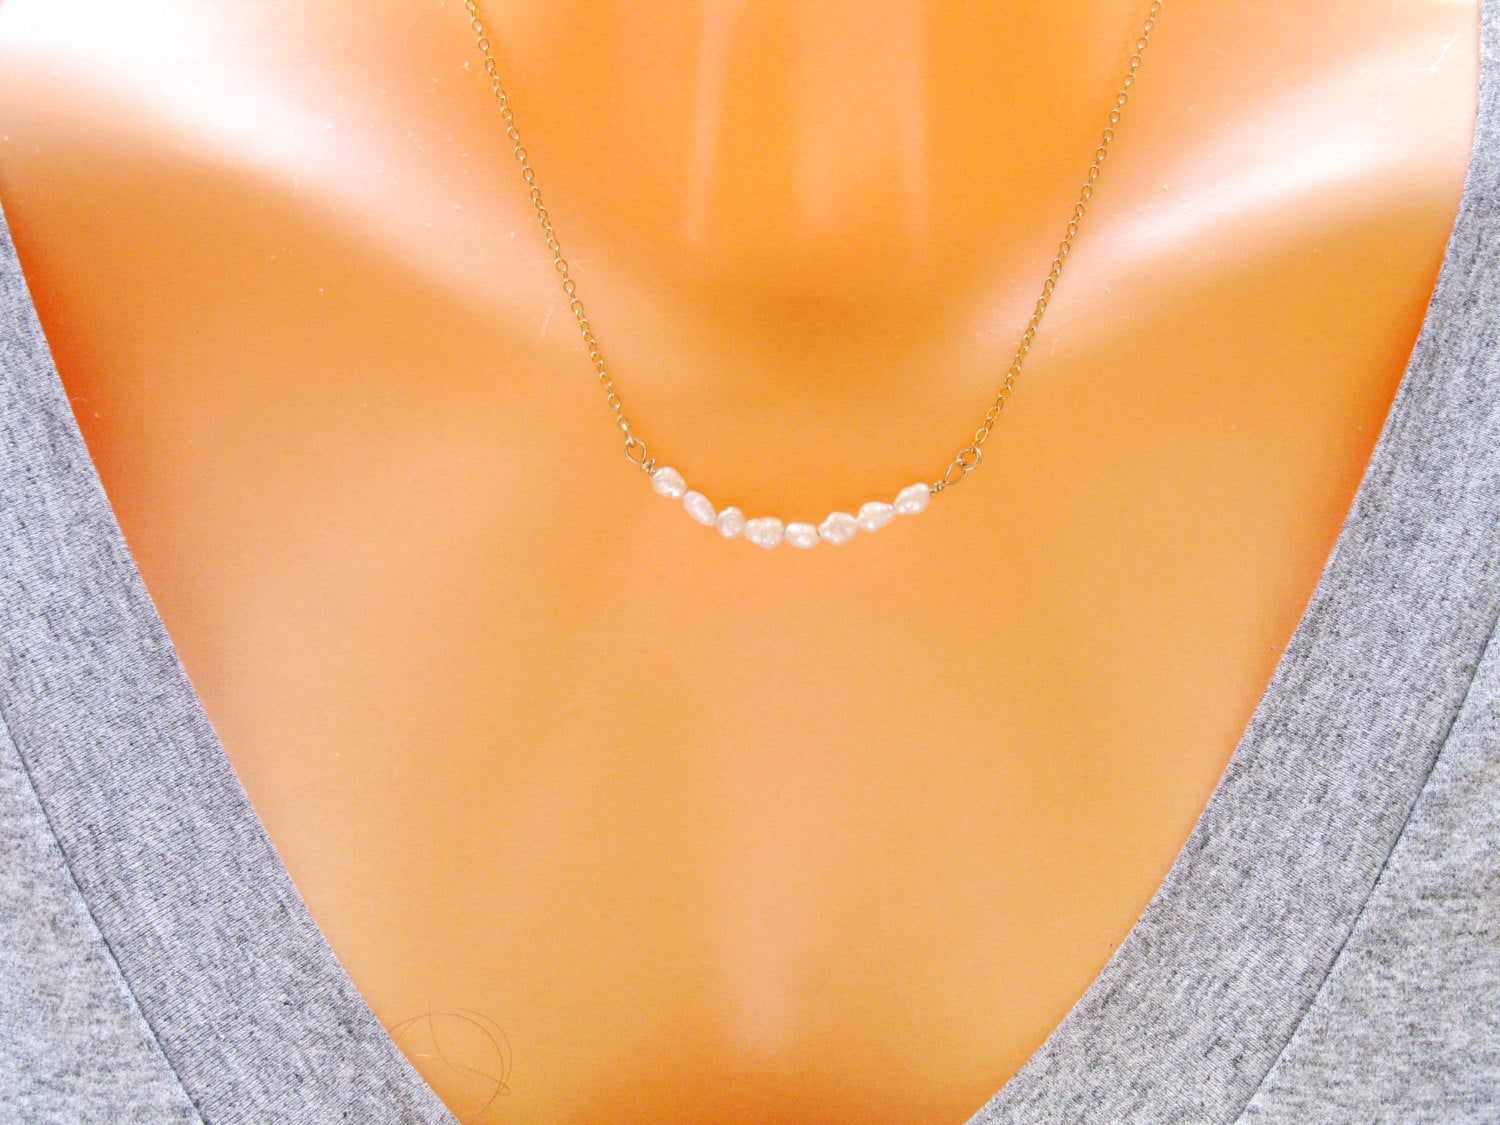 White Pearl Necklace, Pearl Necklace Wedding, Pearl Bar Necklace, Pearl Necklace for Women, Gold Filled Necklace, Pearl Necklace Bridesmaid